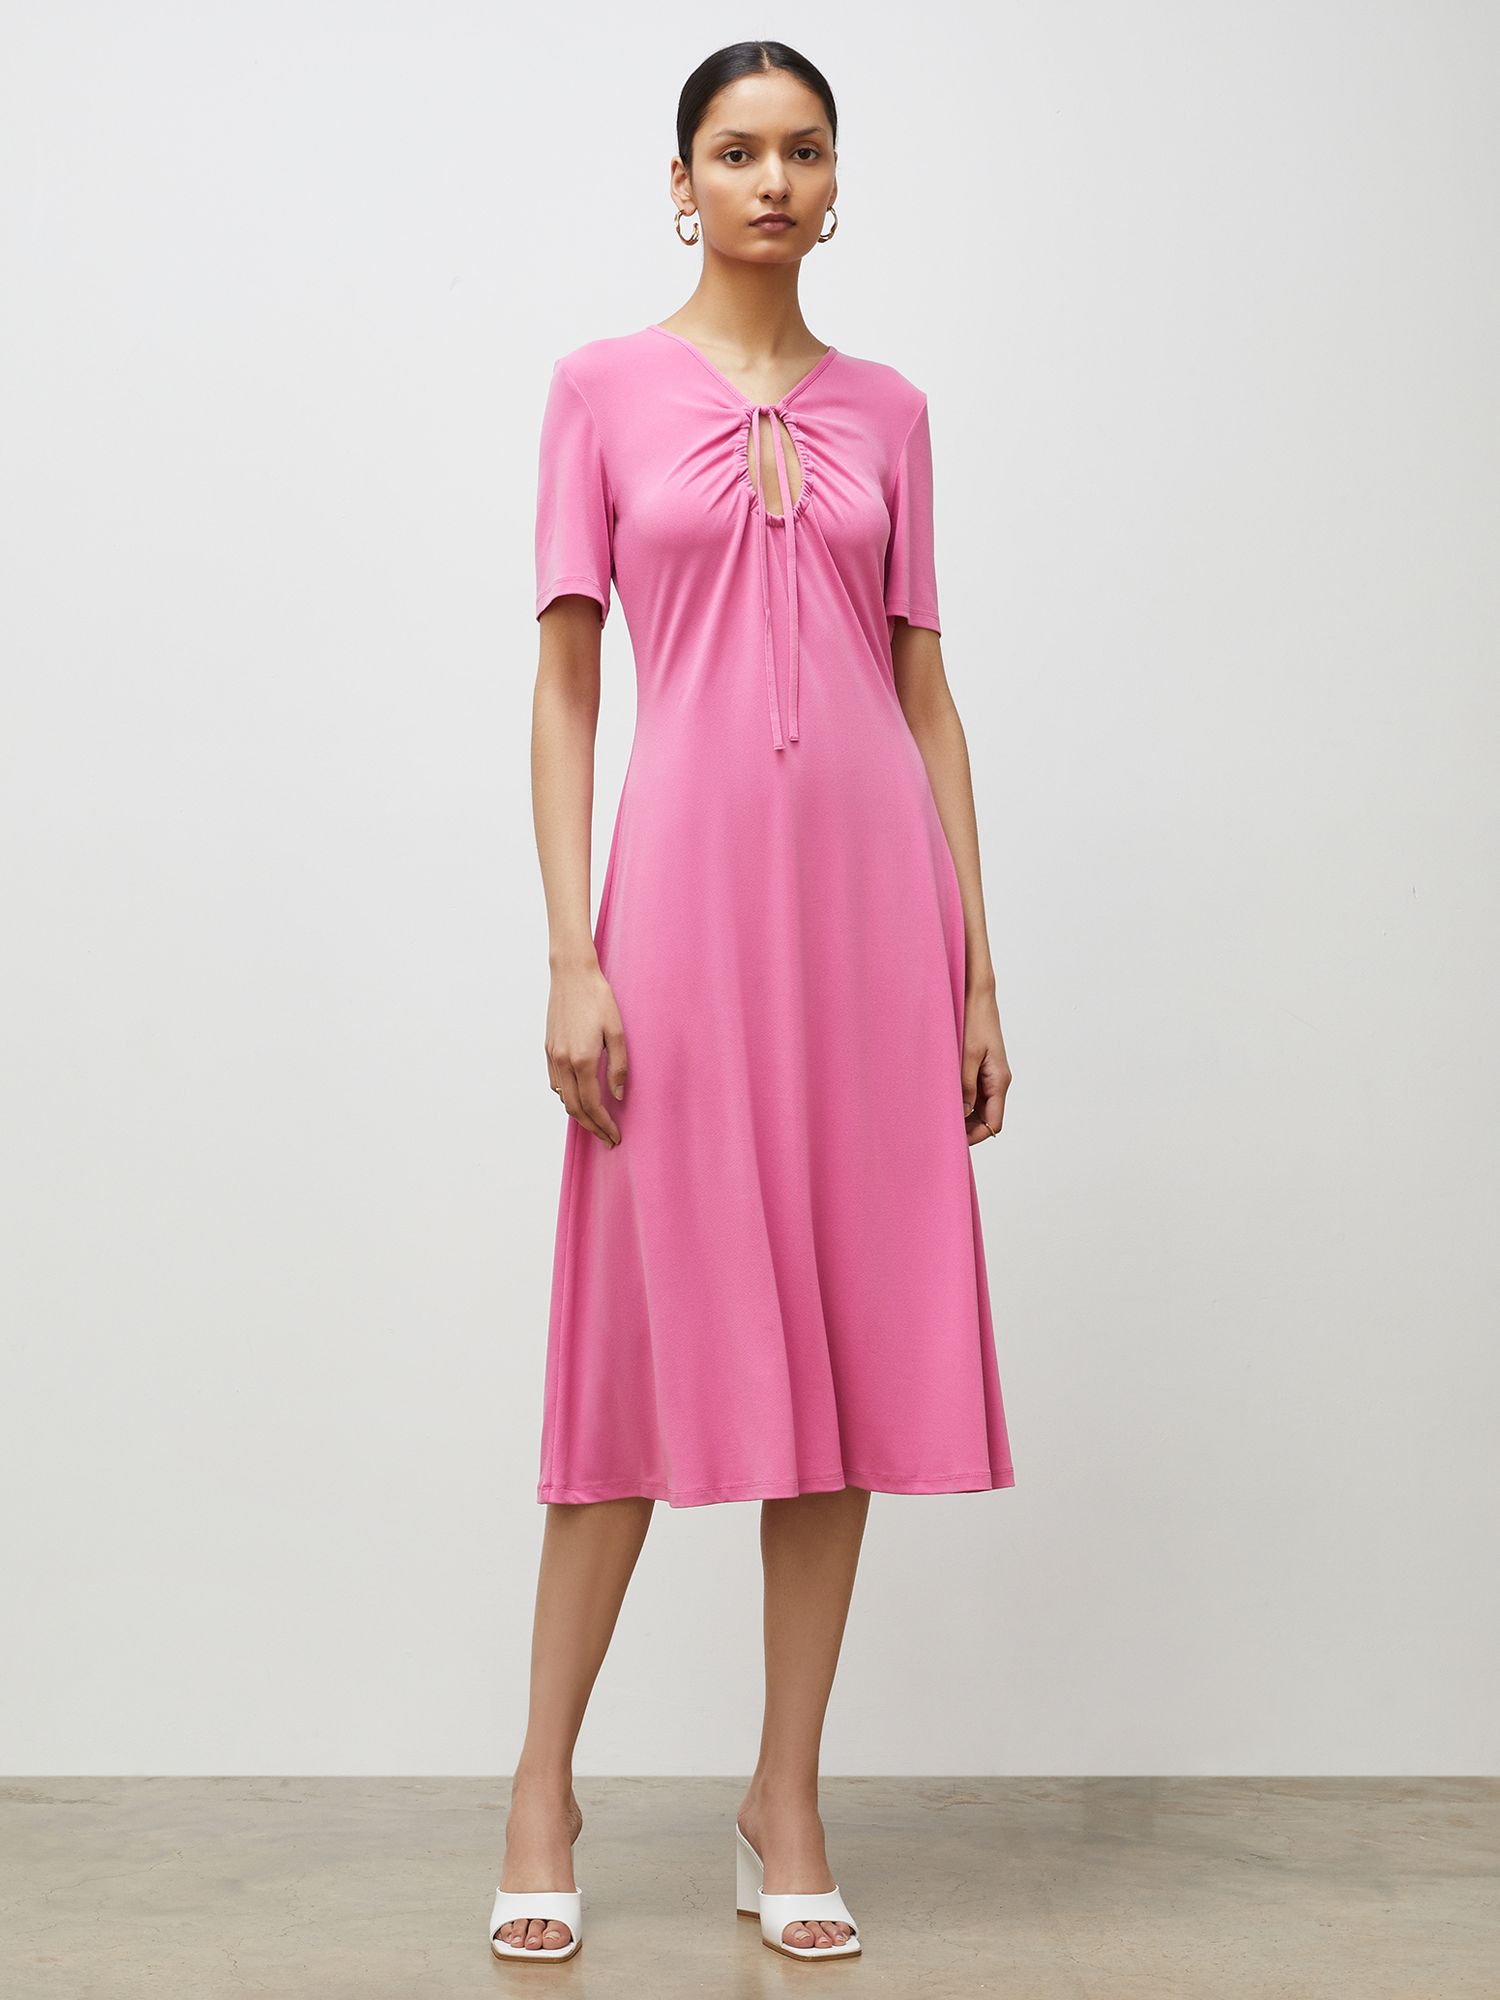 Finery Alice Cut Out Front Midi Dress, Pink at John Lewis & Partners